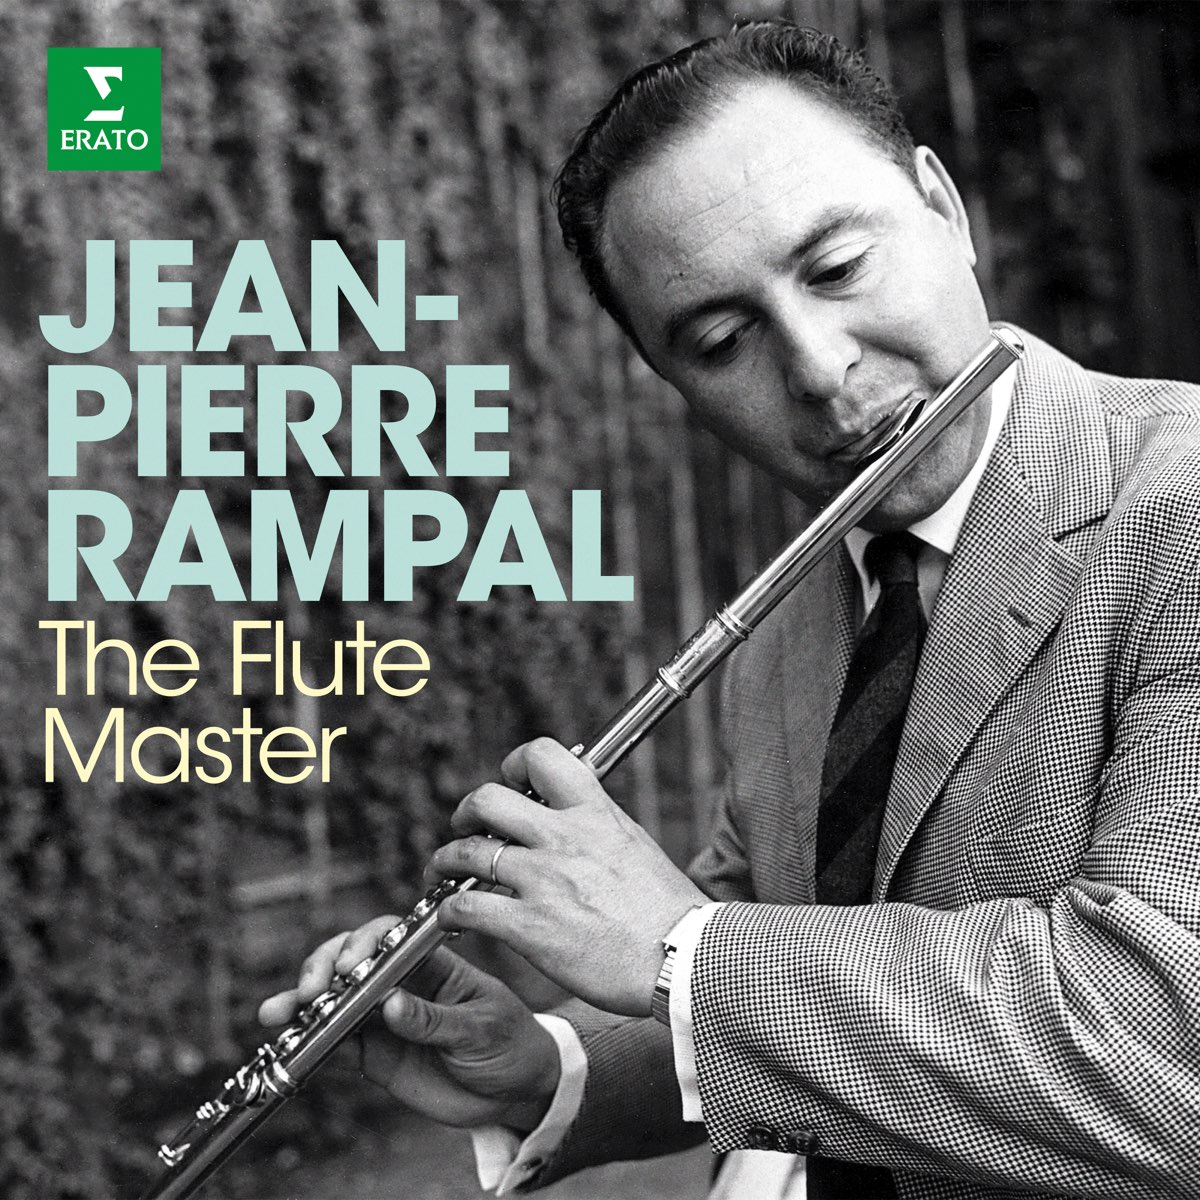 The Flute Master by Jean-Pierre Rampal on Apple Music